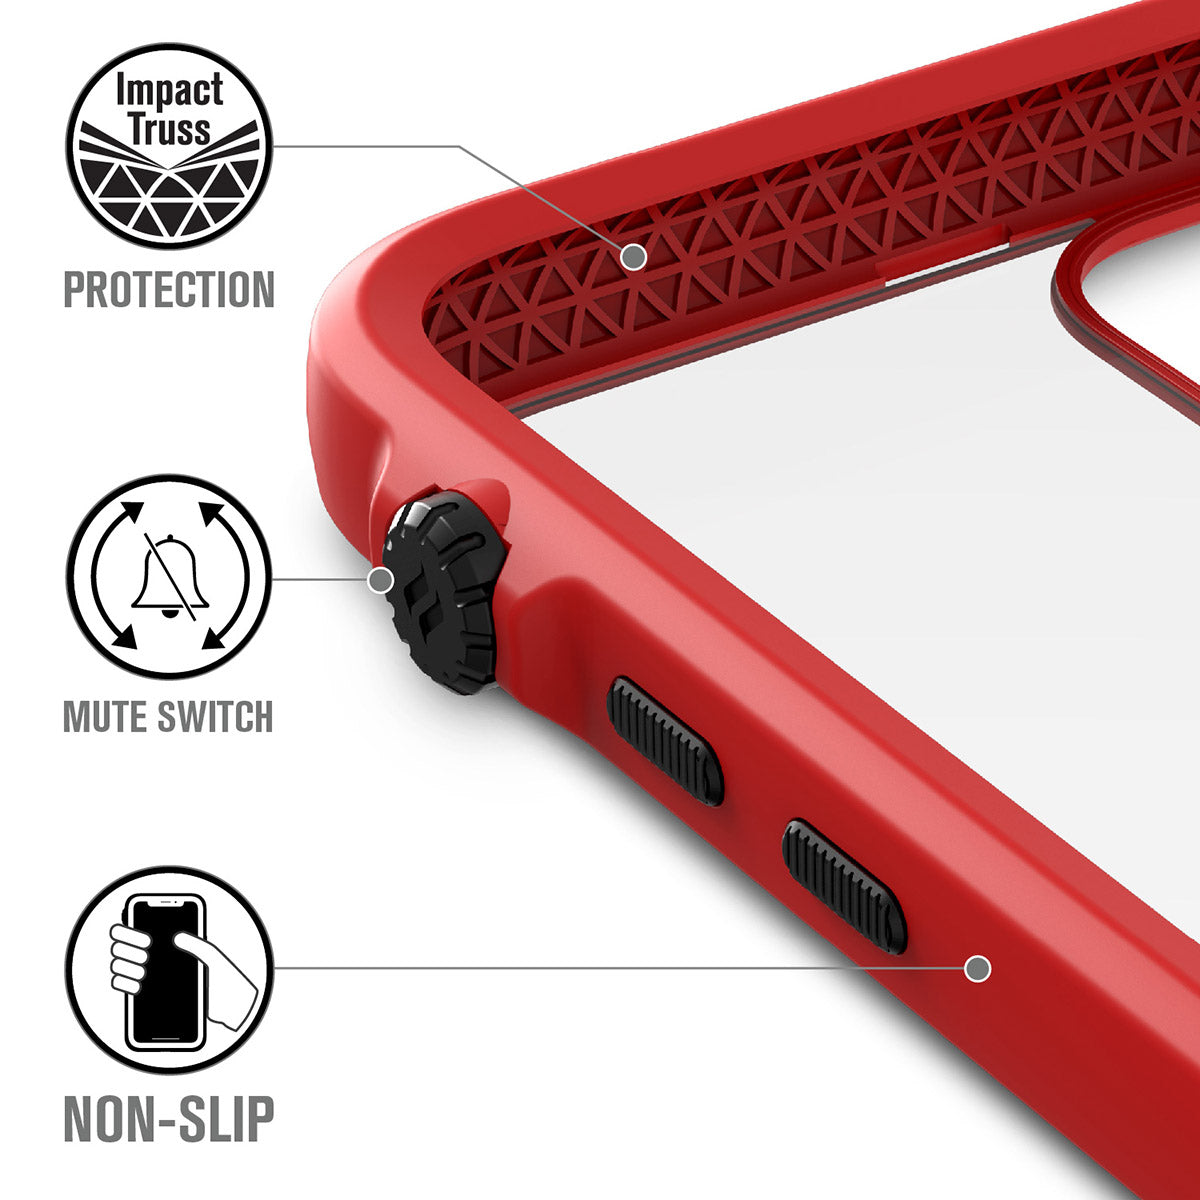 catalyst iPhone 11 series impact protection case flame red showing the impact truss mute switch and buttons of the case for iPhone 11 pro text reads impact truss protection mute switch non-slip